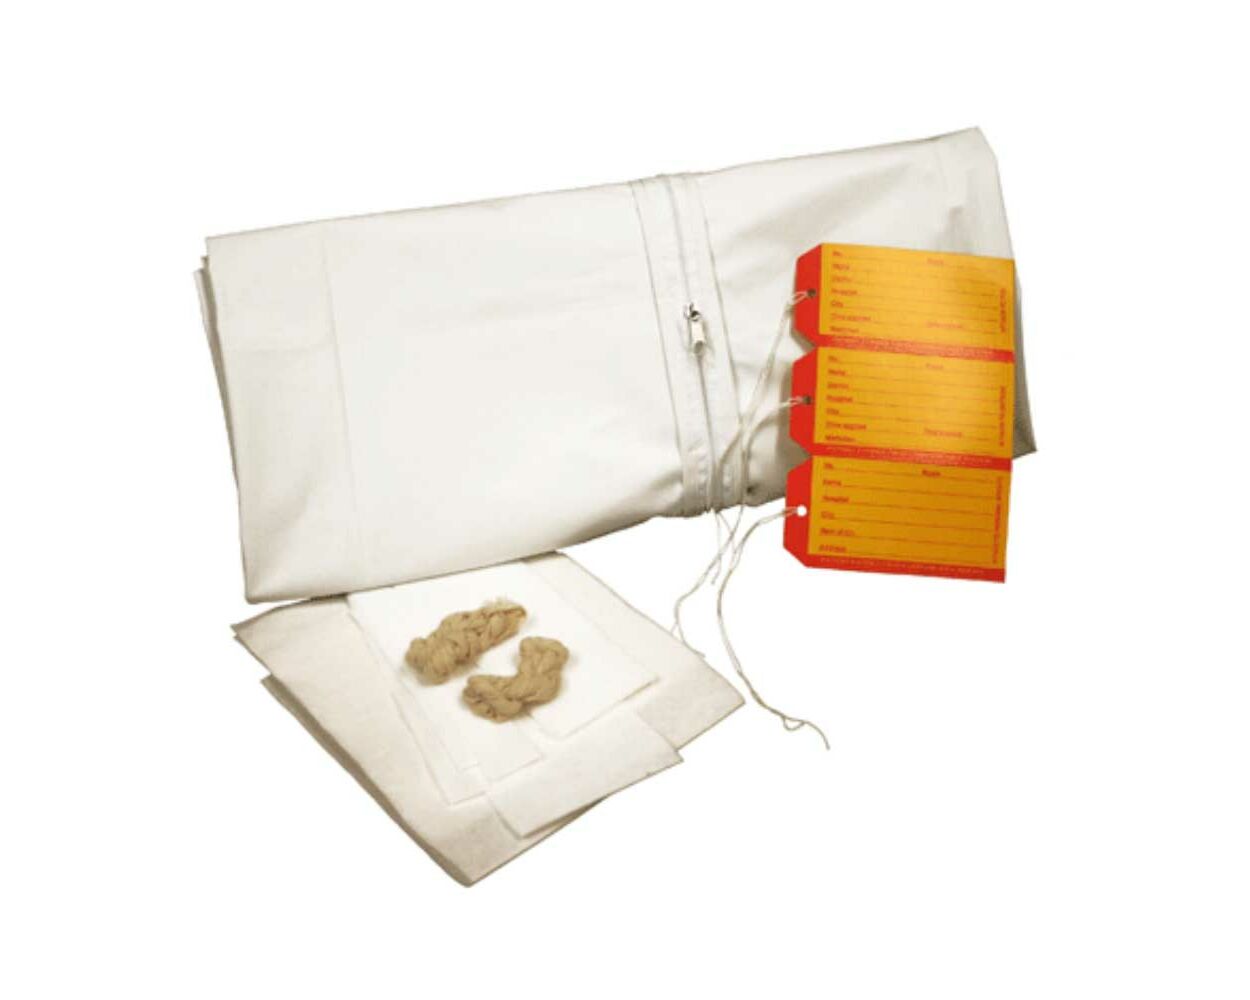 Shroud Kits & Cadaver Bags Products, Supplies and Equipment